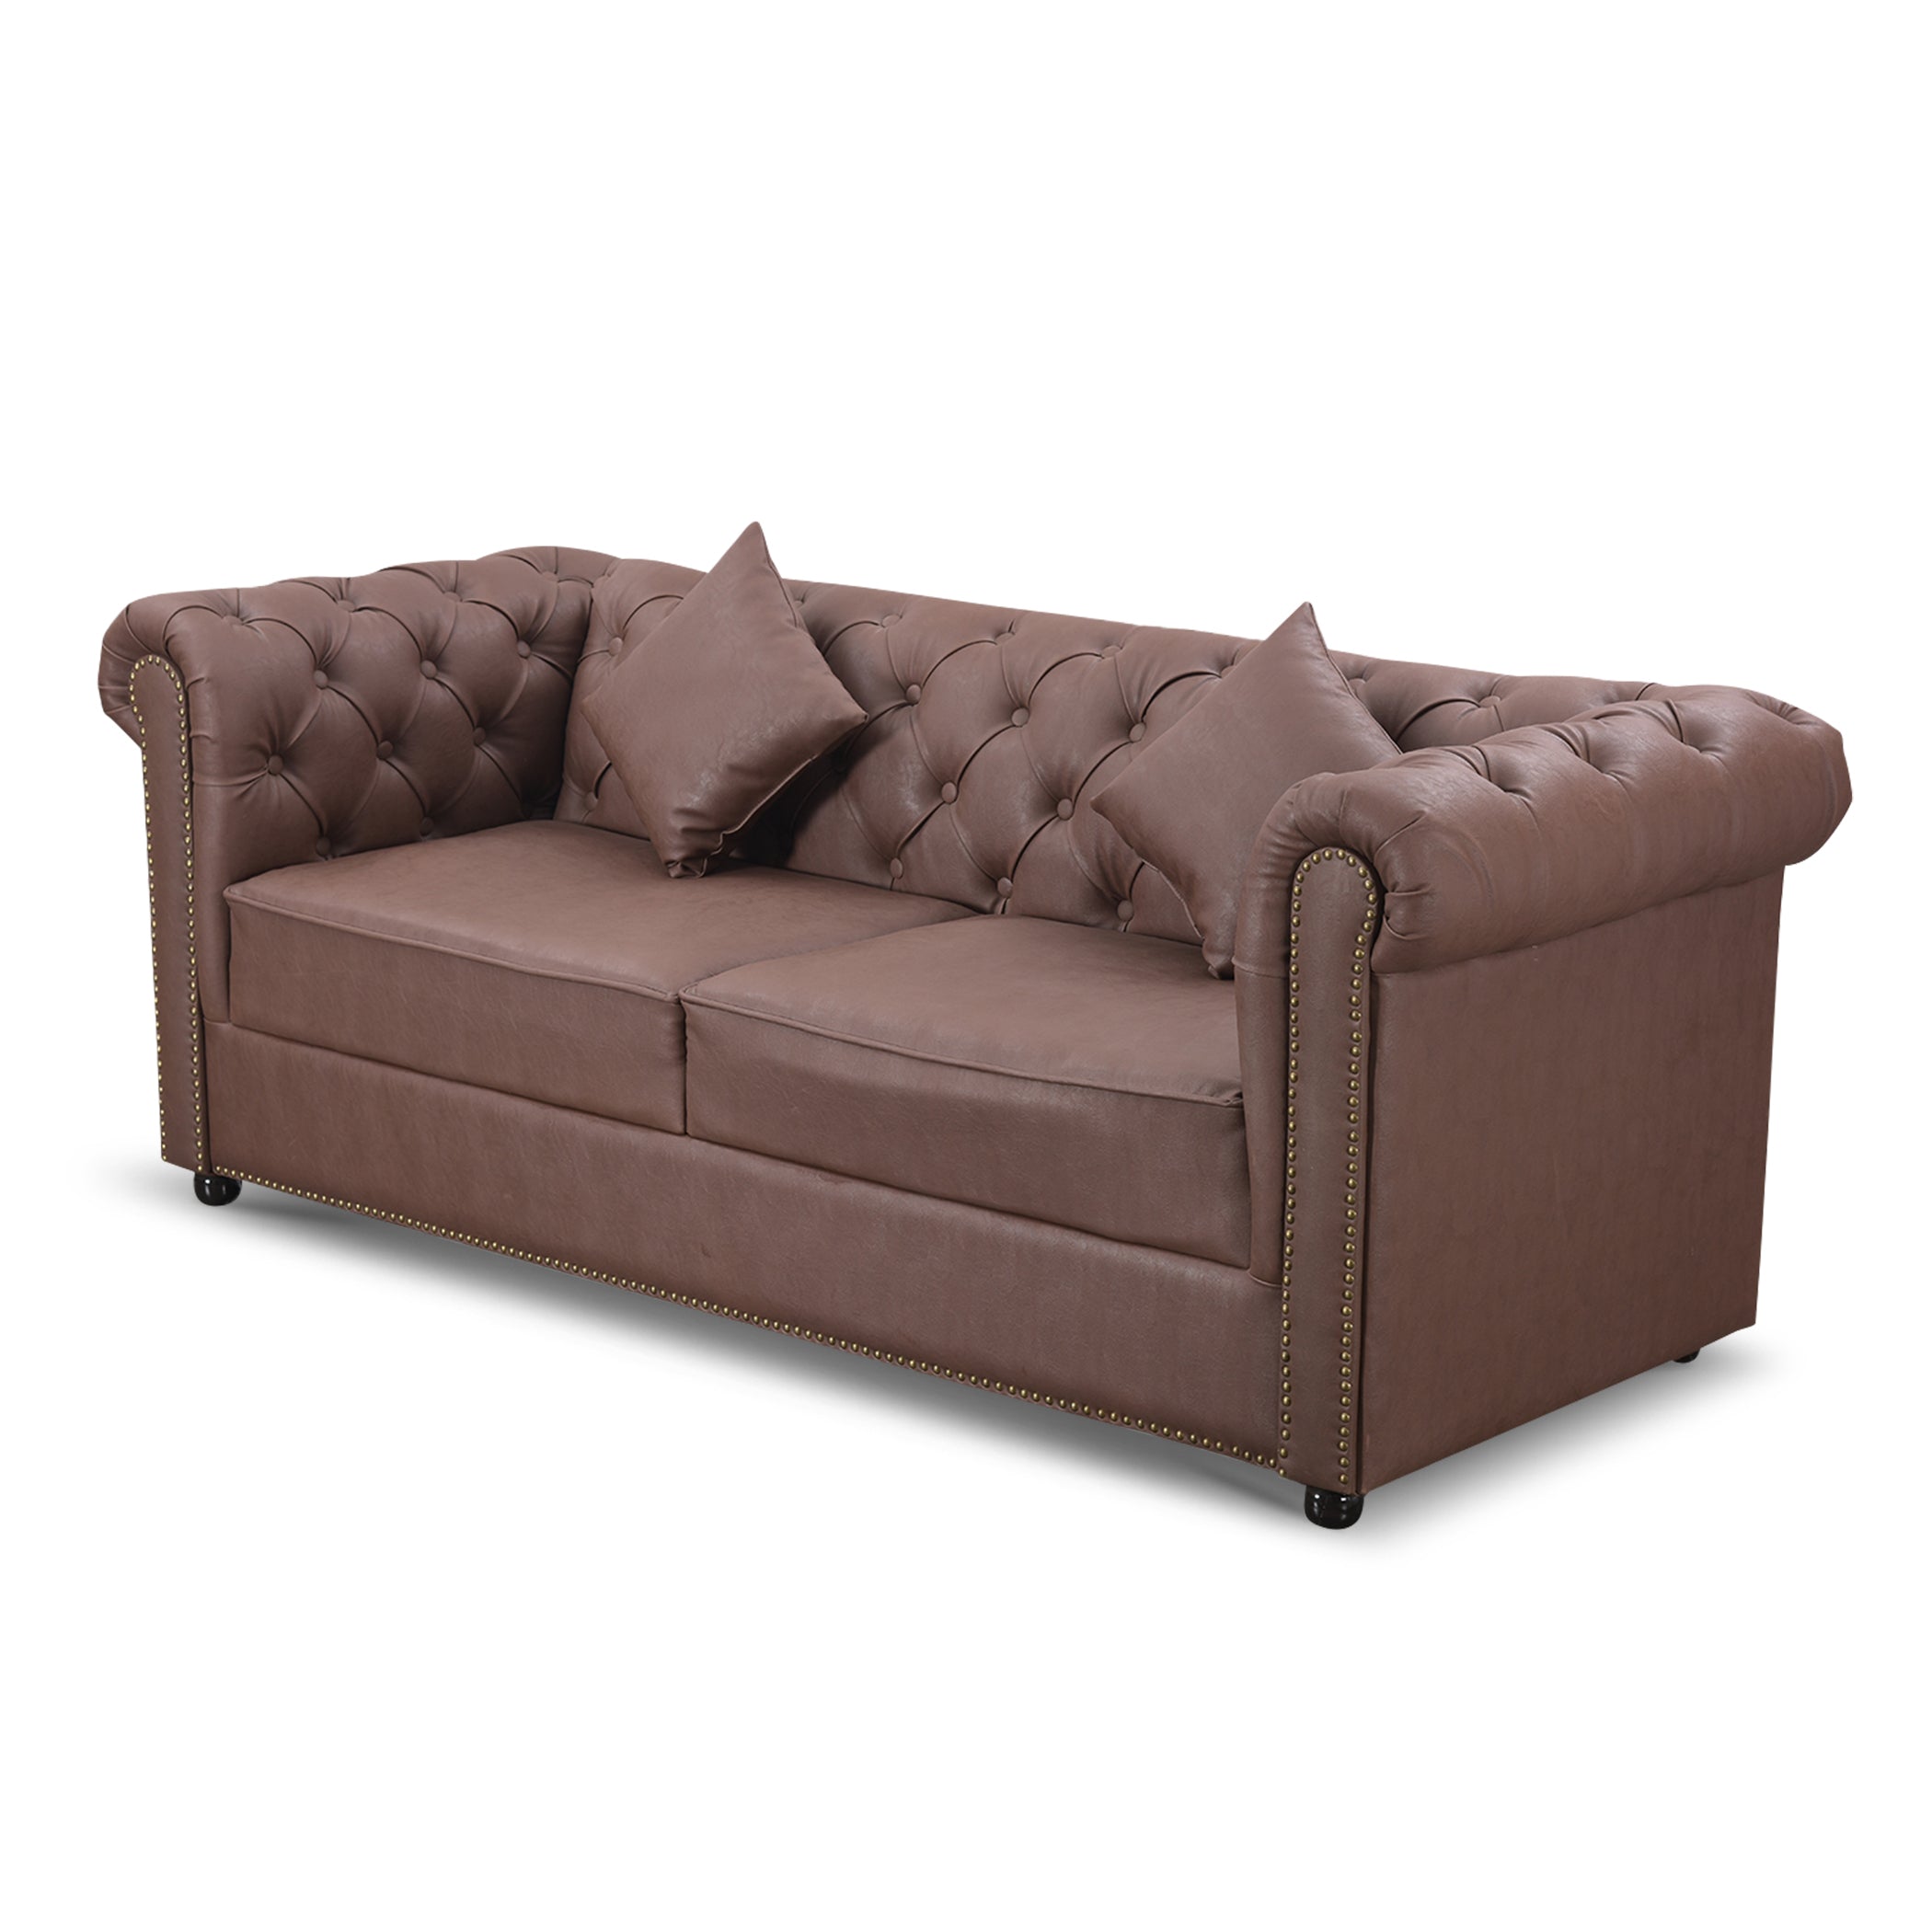 Chester Brown 3S Sofa by Zorin Zorin